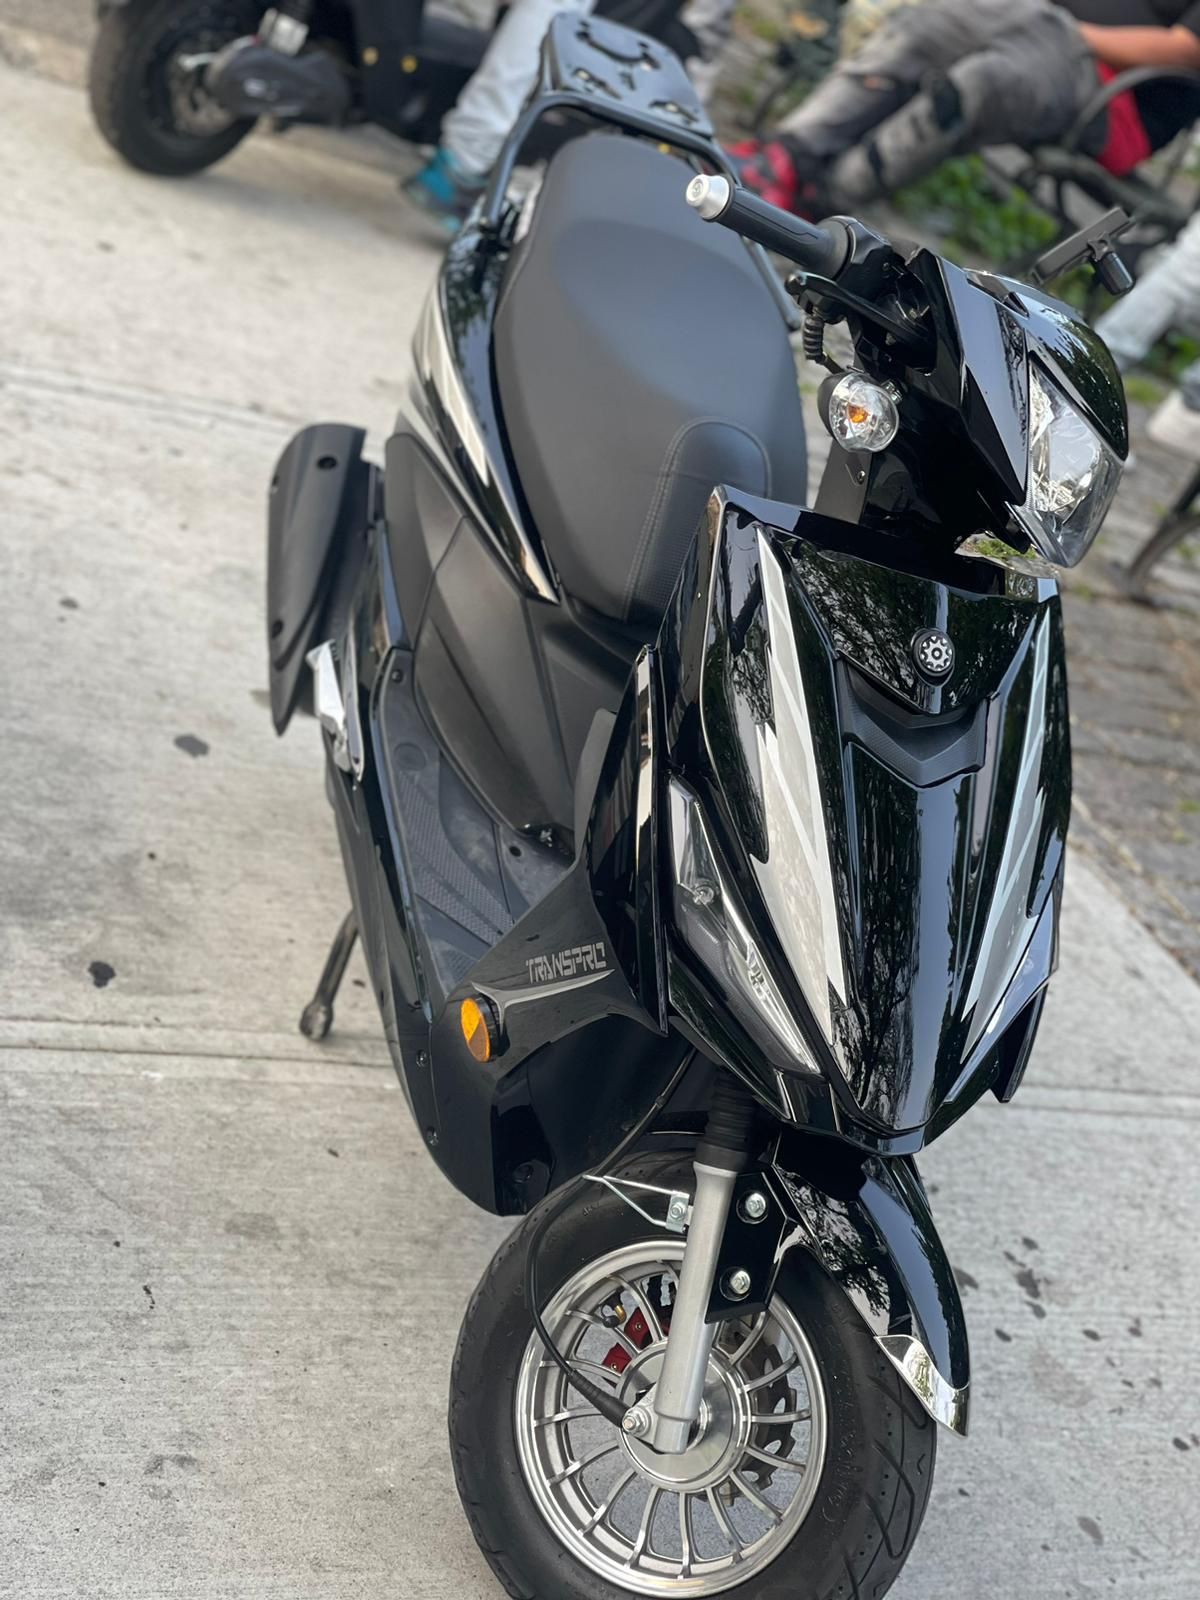 Transpro 150 for Sale in New York, NY - OfferUp